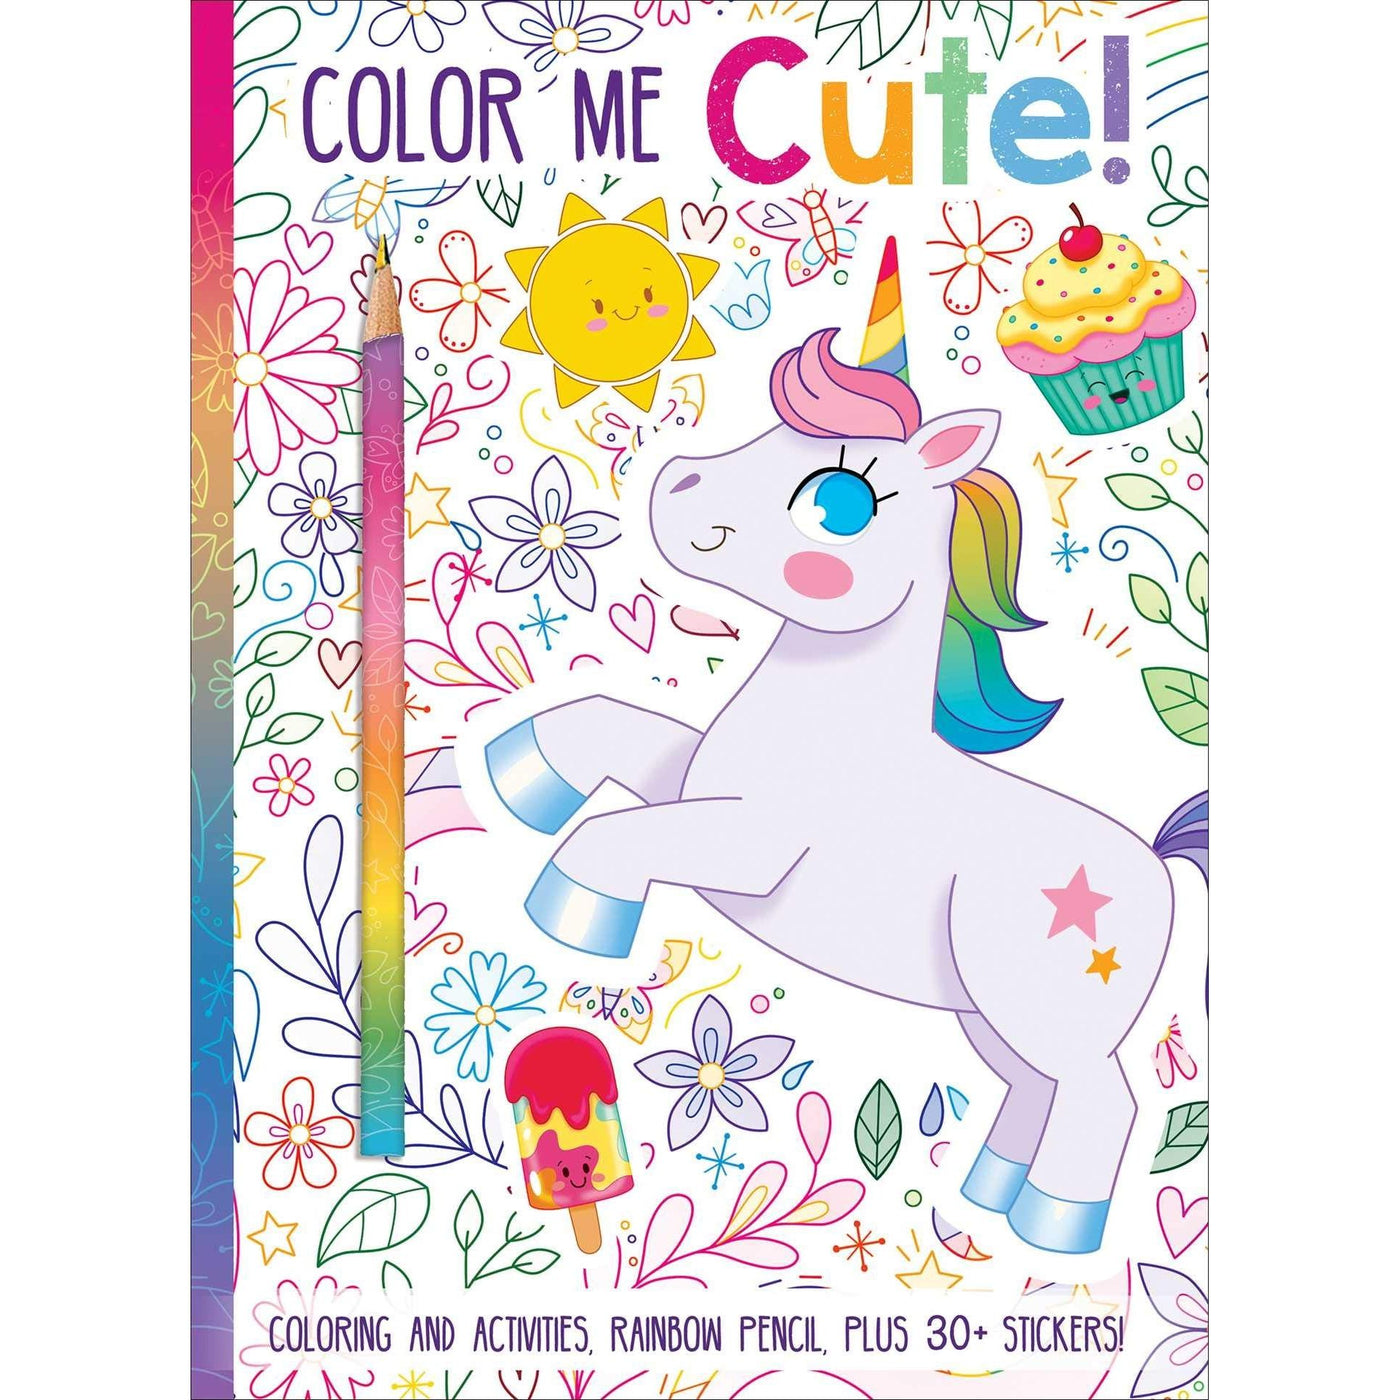 Color Me Cute! Coloring Book with Rainbow Pencil